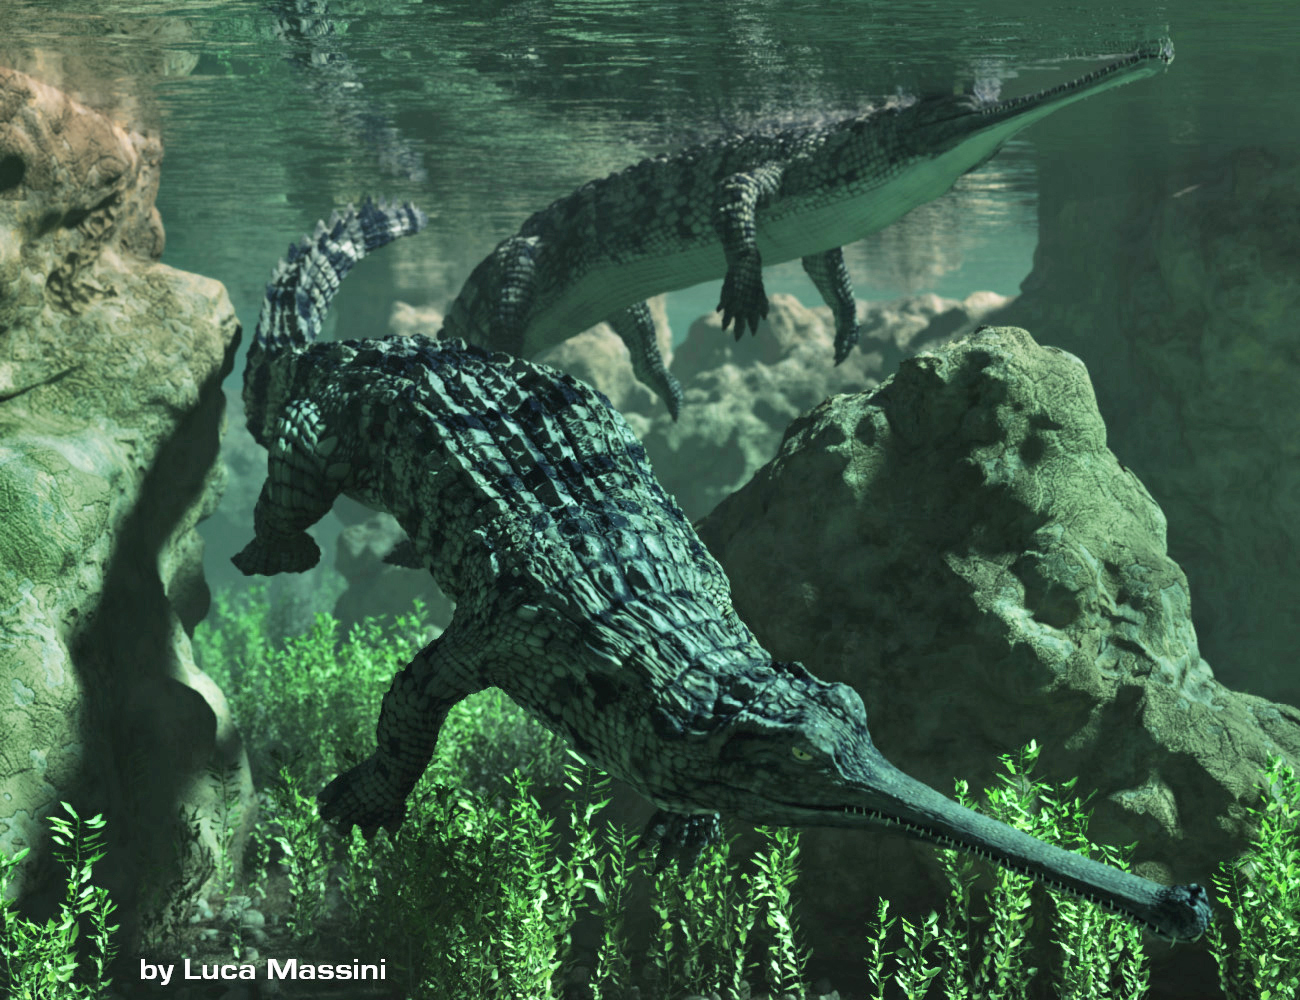 Crocodilia 2: Gharial and Crocodile by: Alessandro_AM, 3D Models by Daz 3D